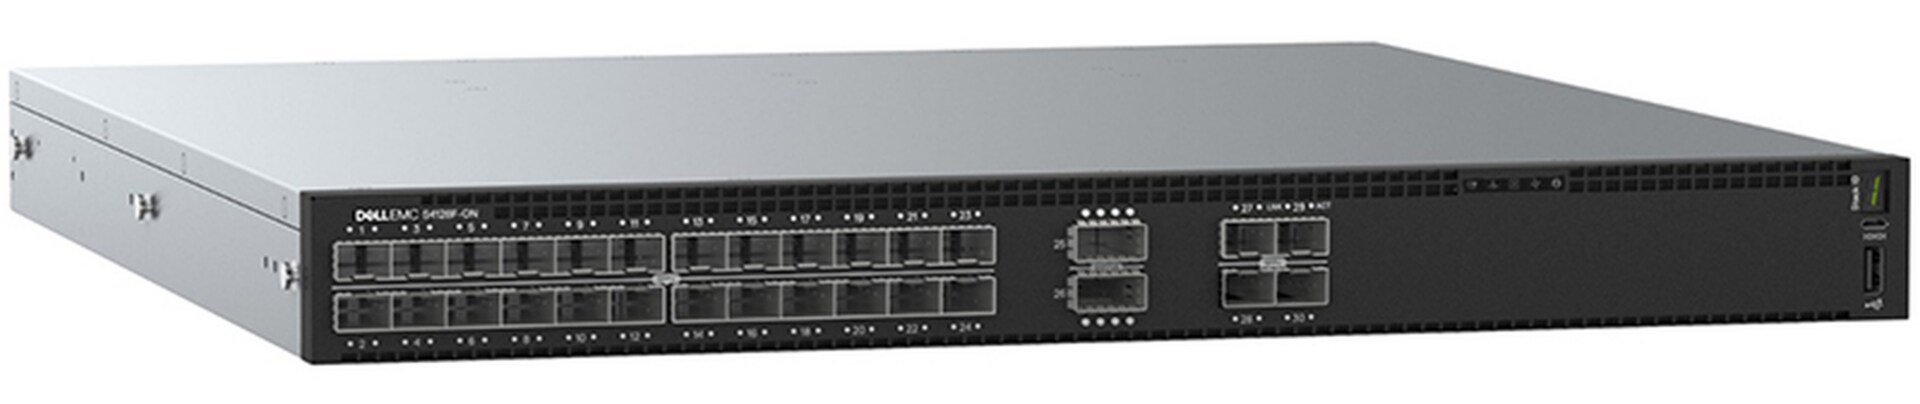 Dell PowerSwitch S4128F-ON Switch with Power Supply Unit to IO Panel Airflow and OS10 Software